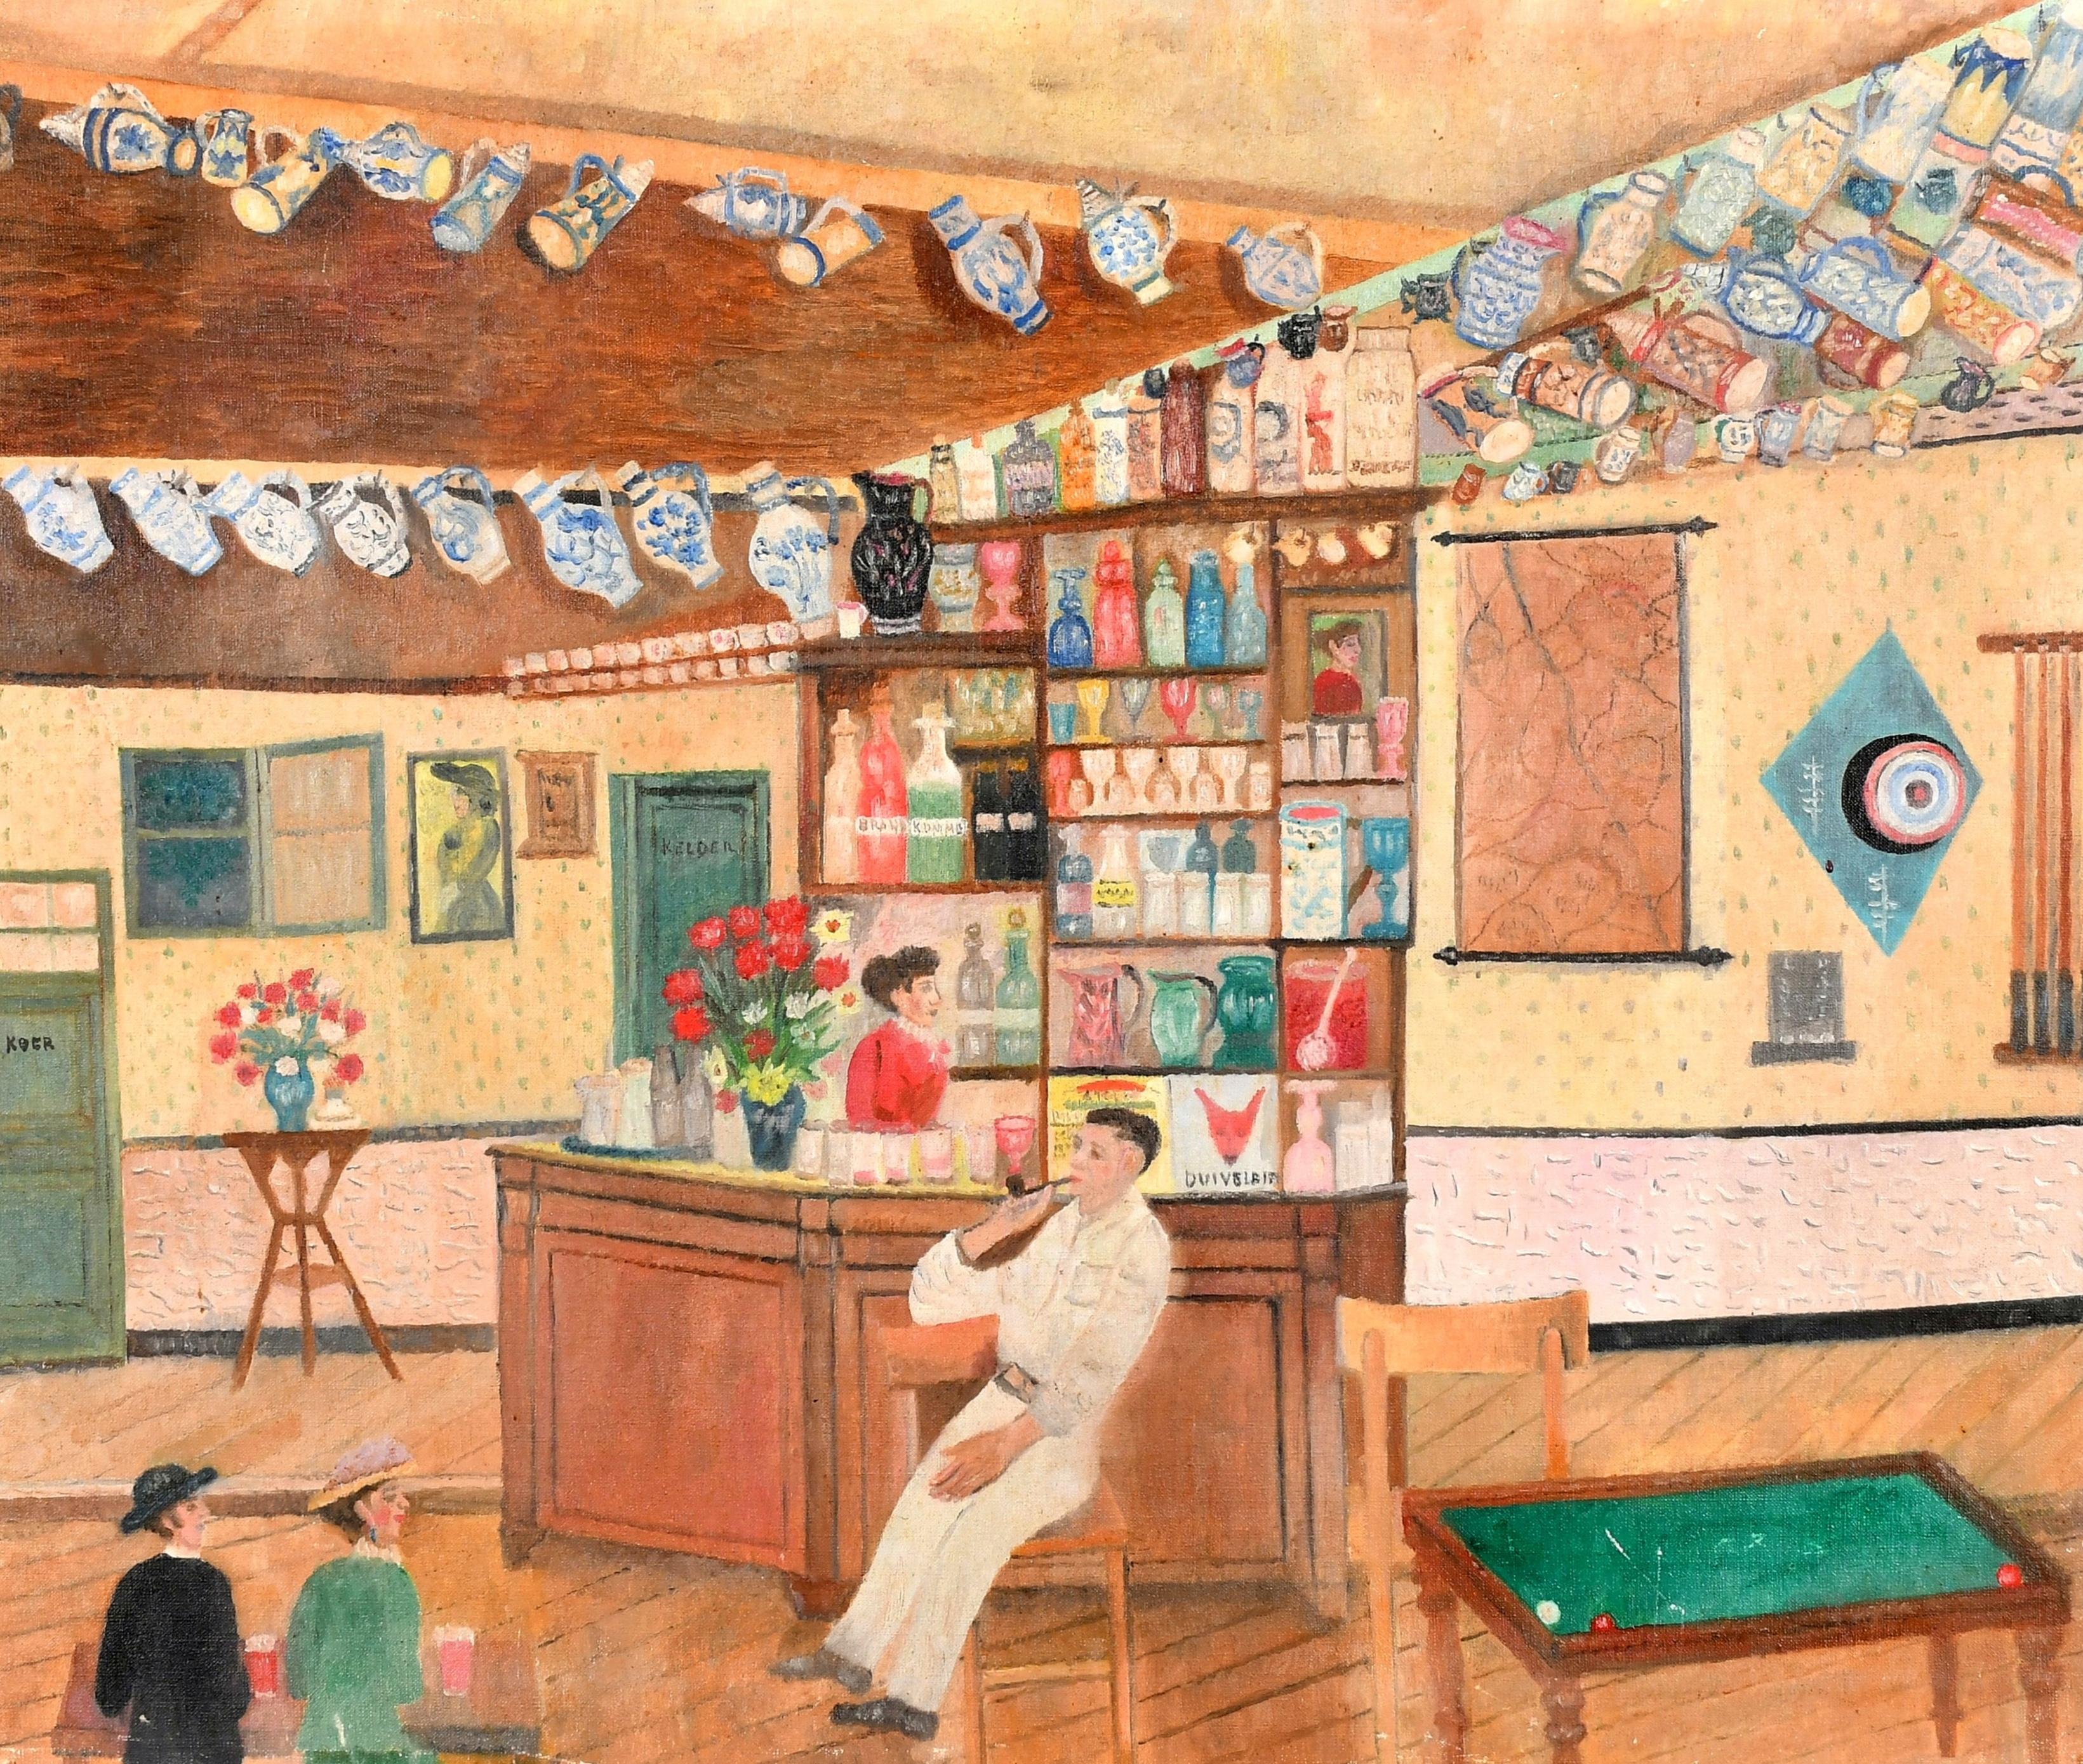 Mid 20th Century Dutch School Interior Painting - The Bar - Mid 20th Century Dutch Naif Interior Figurative Oil on Canvas Painting